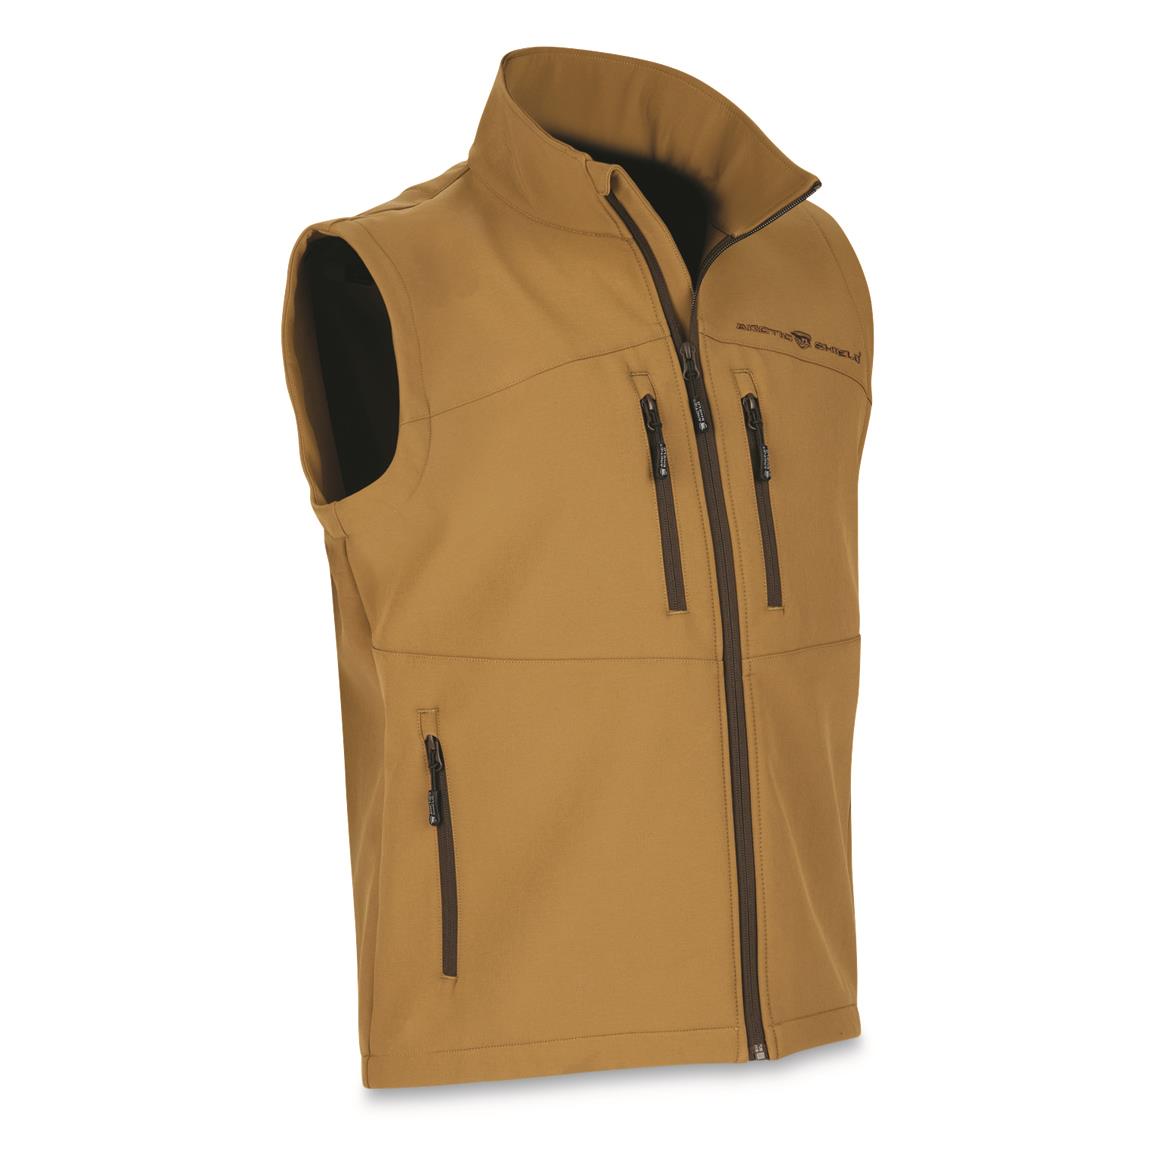 Beyond A7 Cold Weather High Loft Vest - 732835, Tactical Clothing 